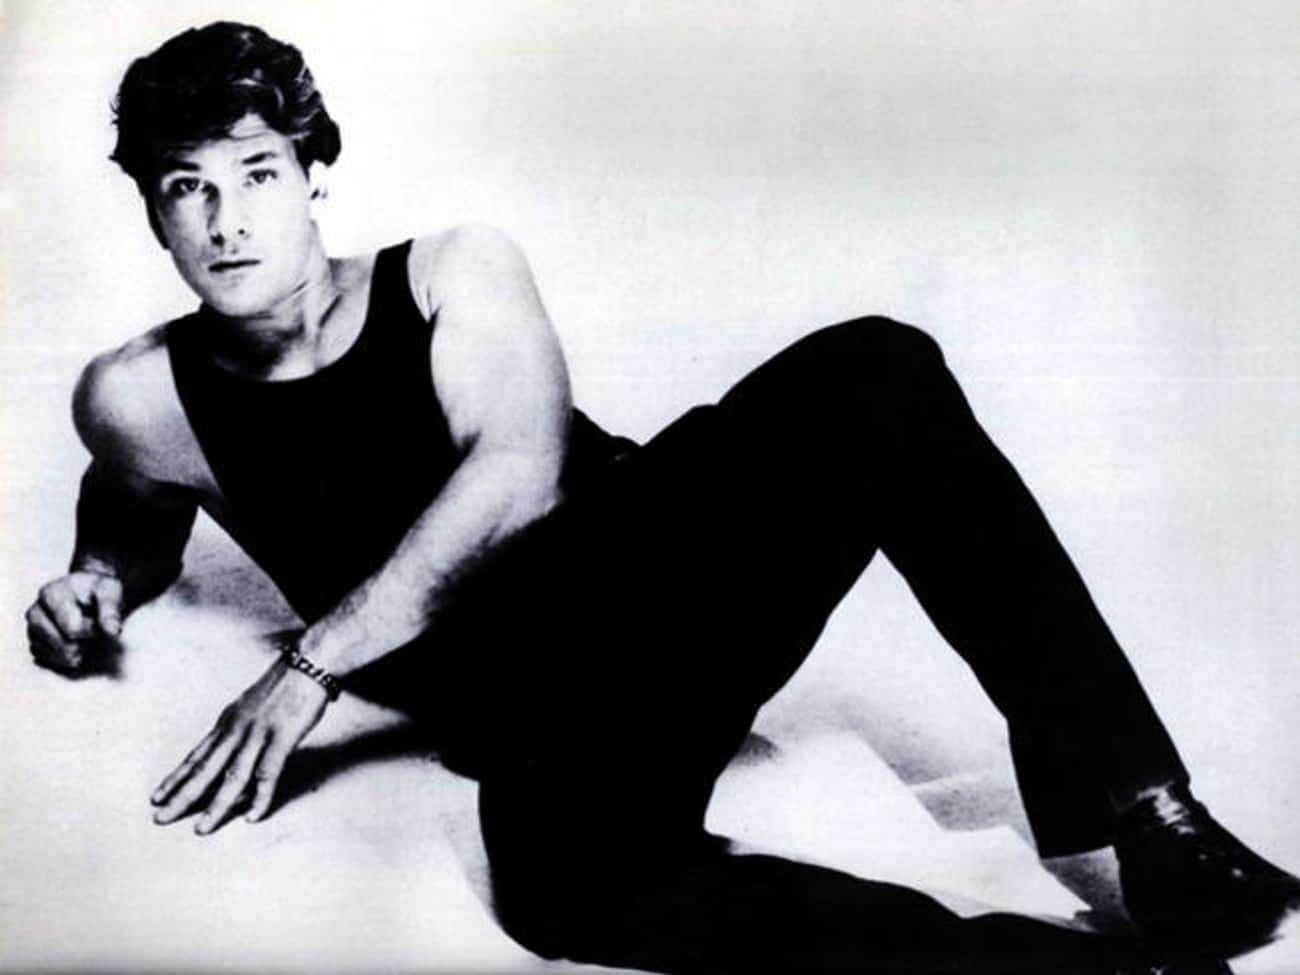 Young Patrick Swayze in Black Tank Top and Black Pants